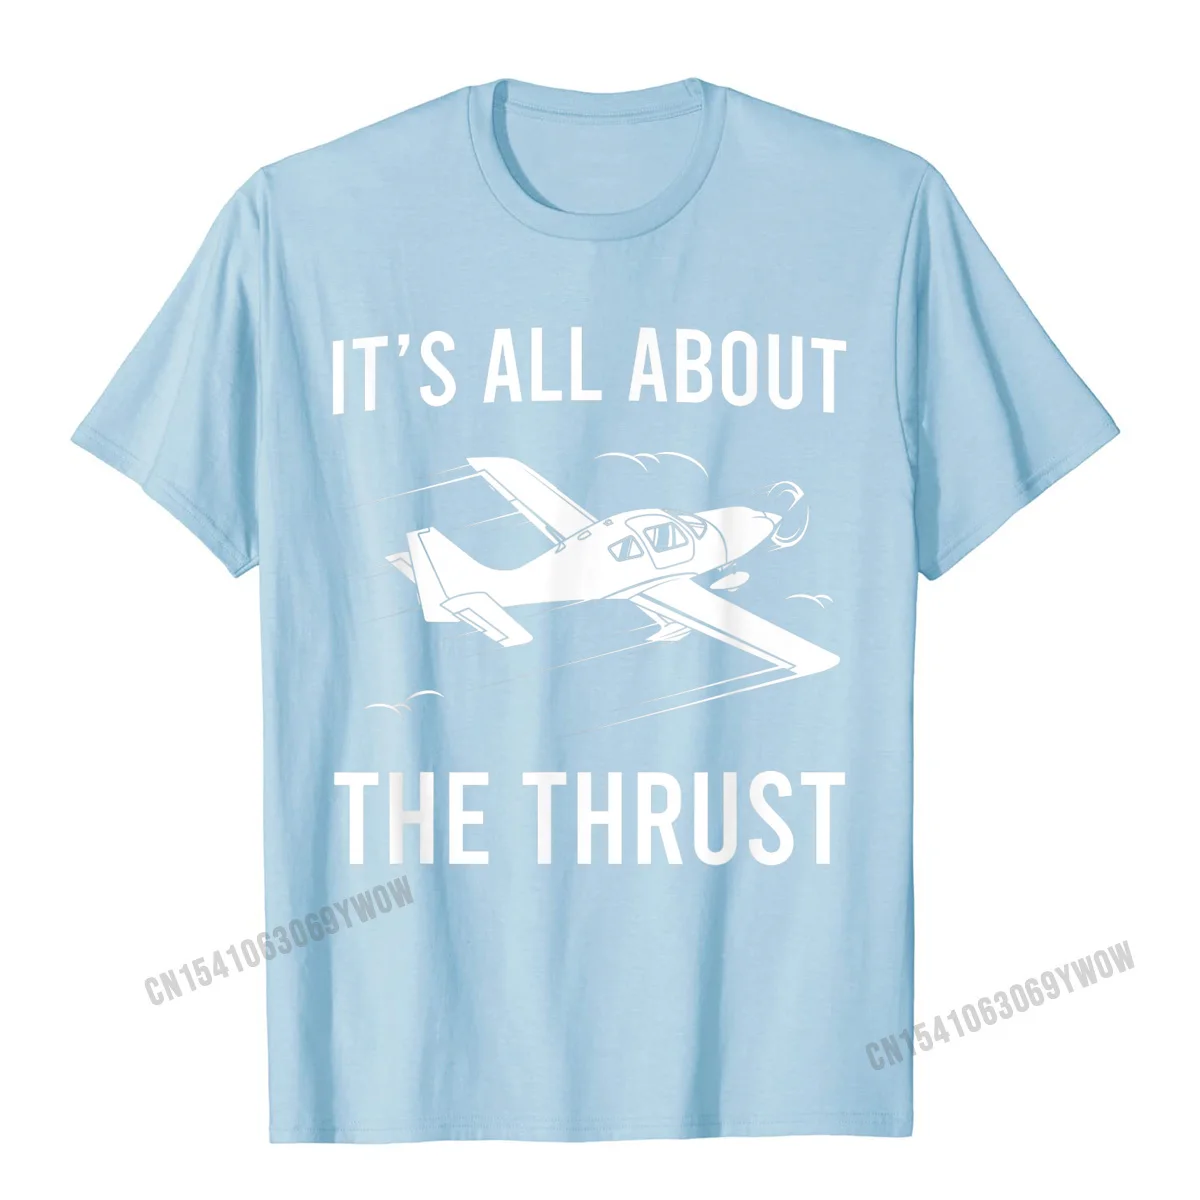 100% Cotton Fabric Men Short Sleeve Normal T-Shirt Gift T Shirt Slim Fit Print Round Neck T-Shirt Drop Shipping Funny Pilot Its All About The Thrust Airplane Pilot Gift T-Shirt__35 light